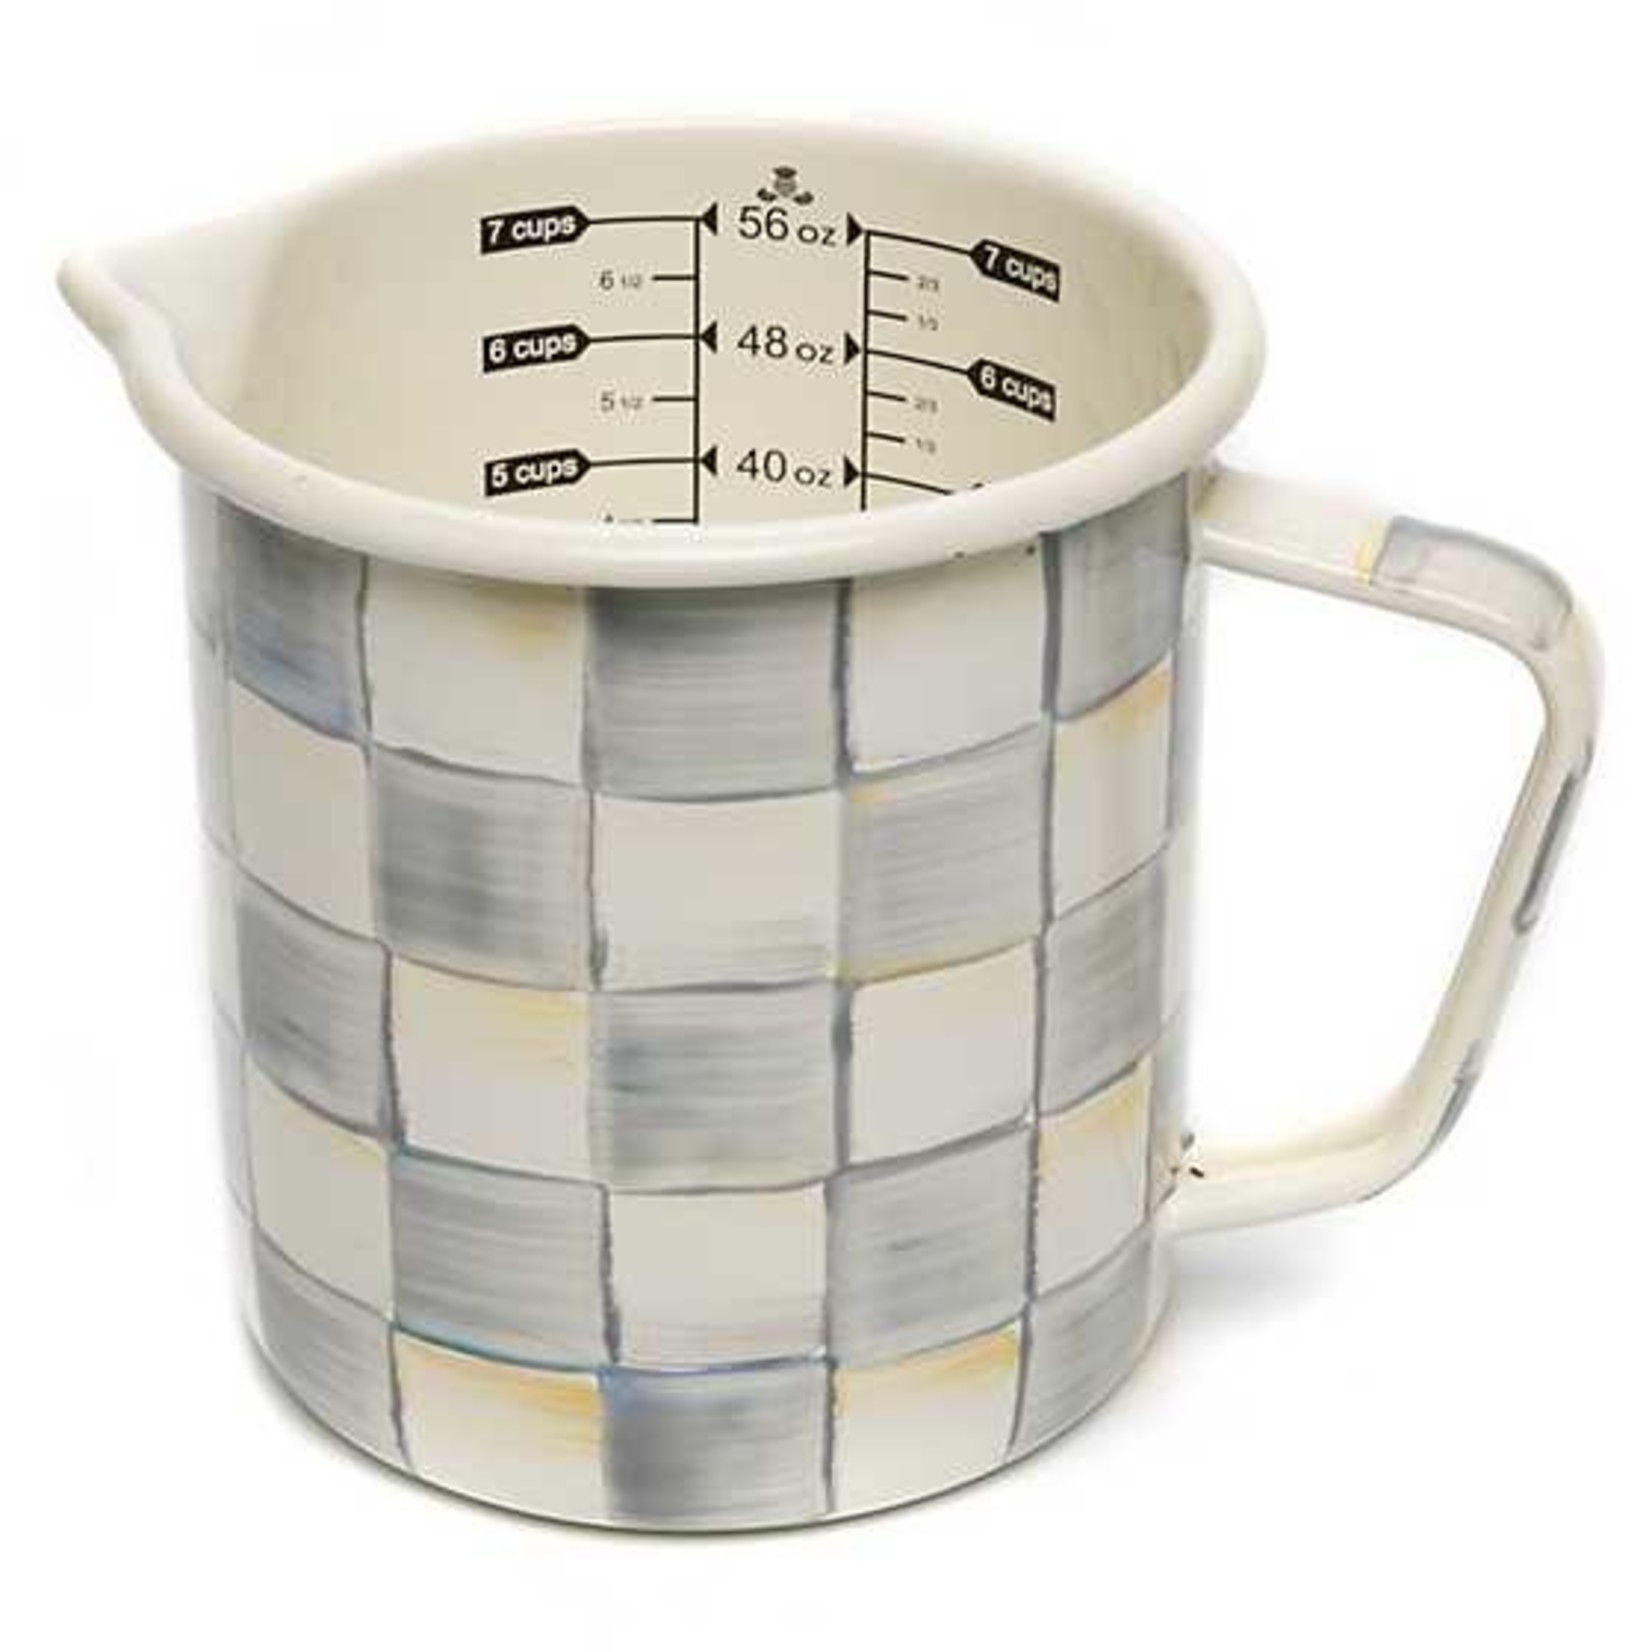 MacKenzie Childs Sterling Check Enamel 7 Cup Measuring Cup